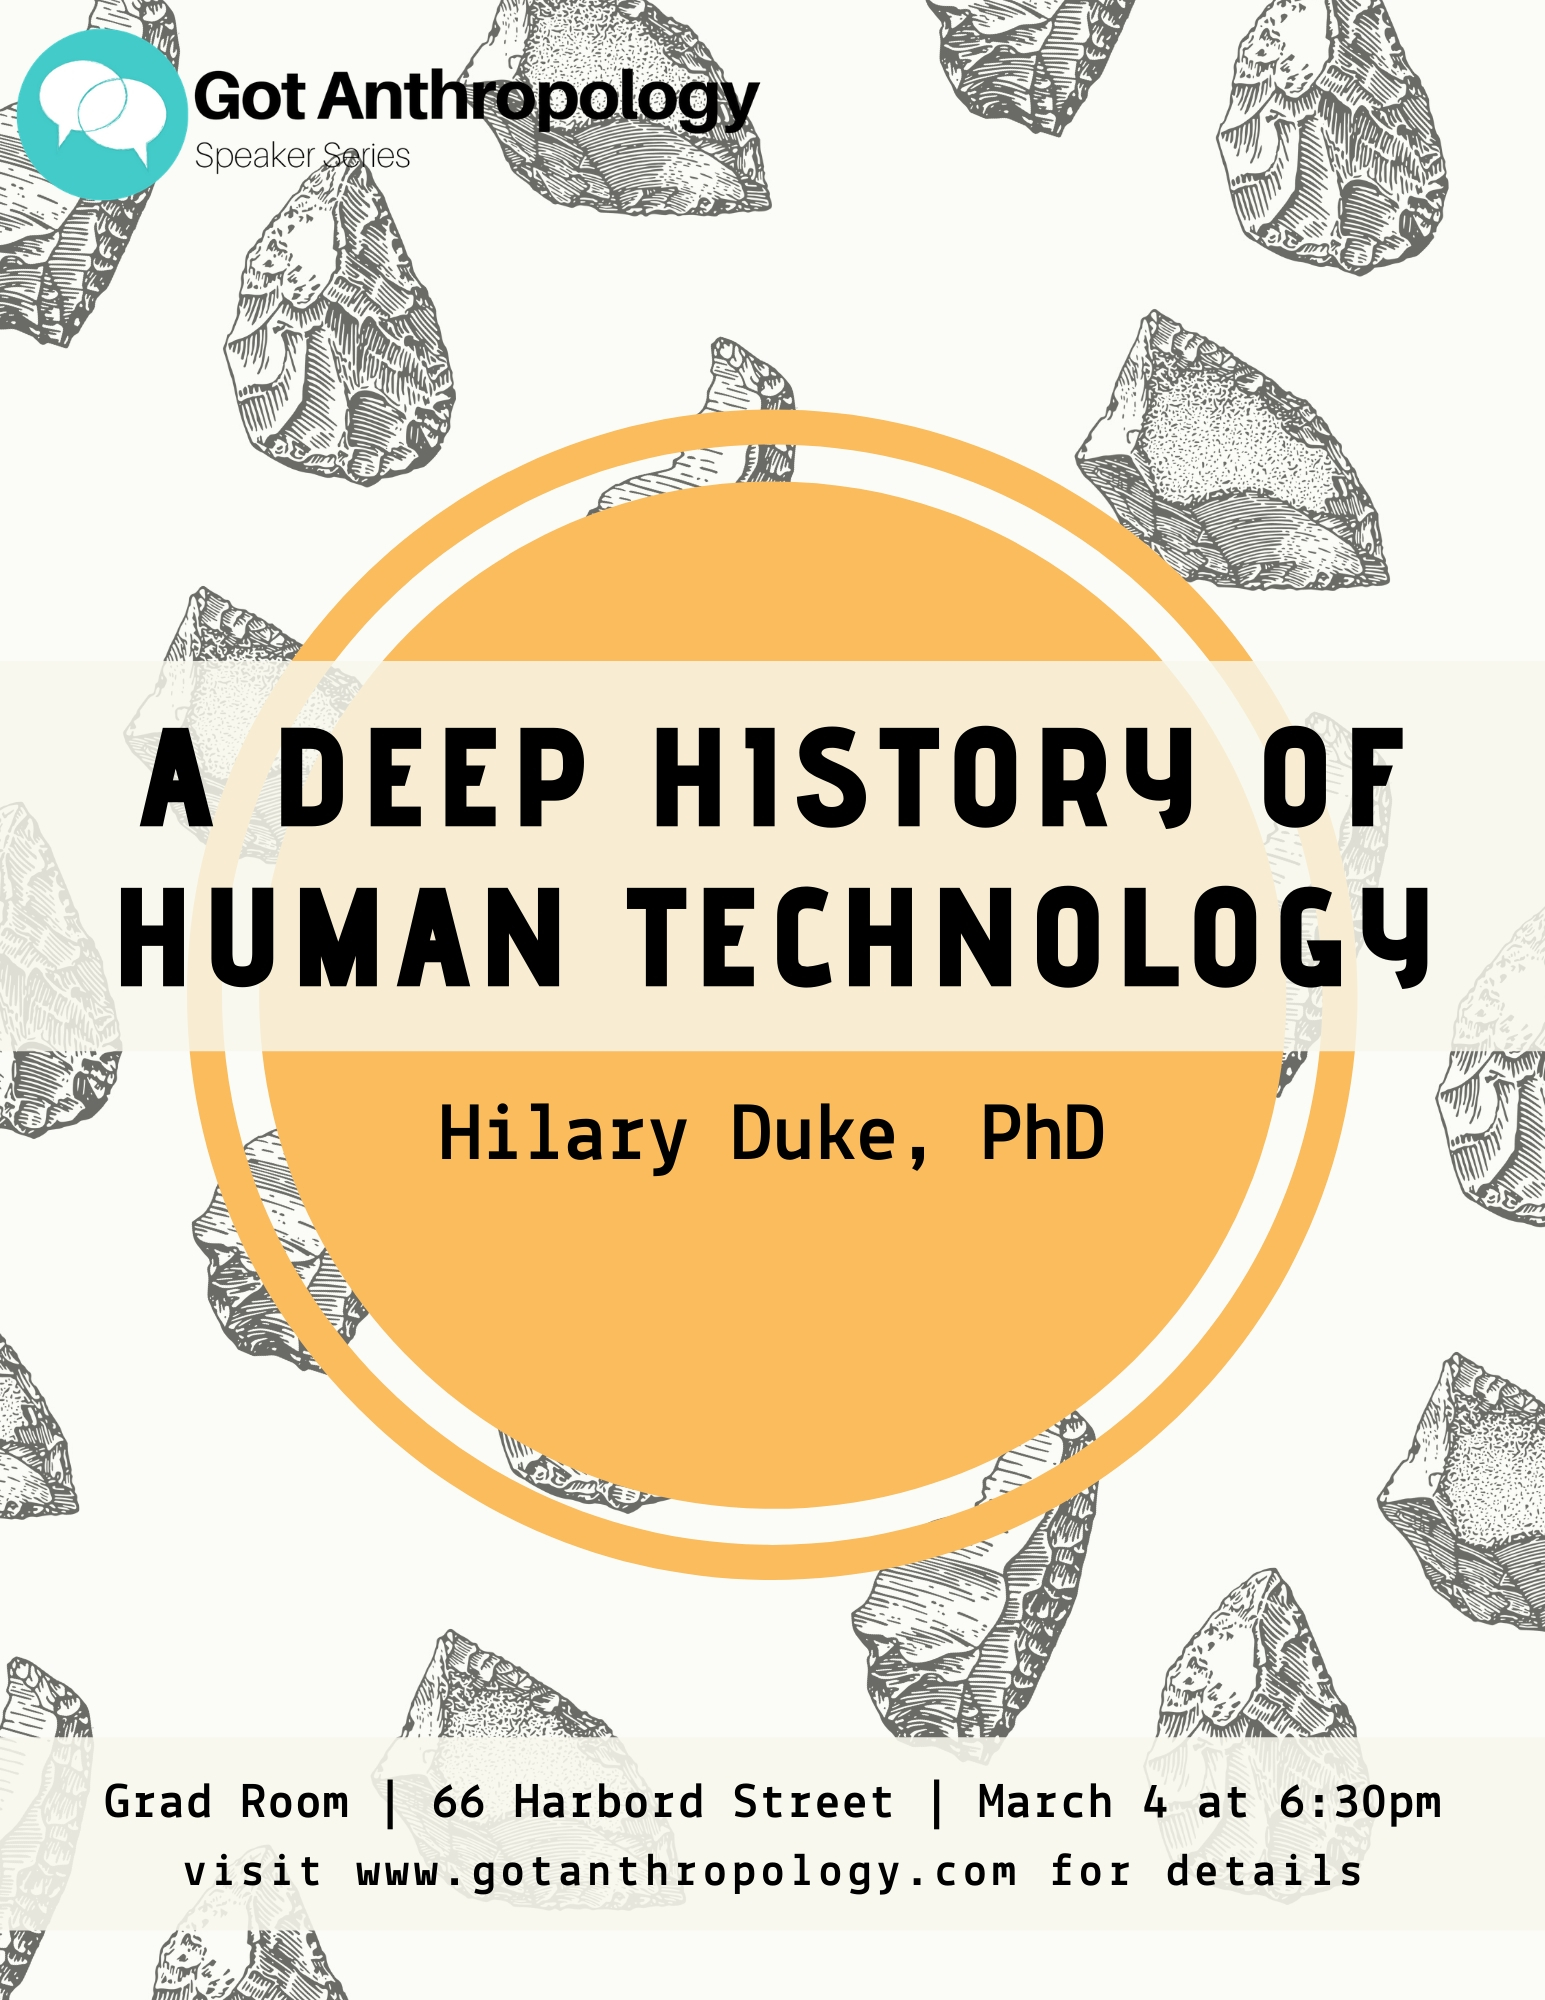 Poster featuring the "Deep History of Human Technology"